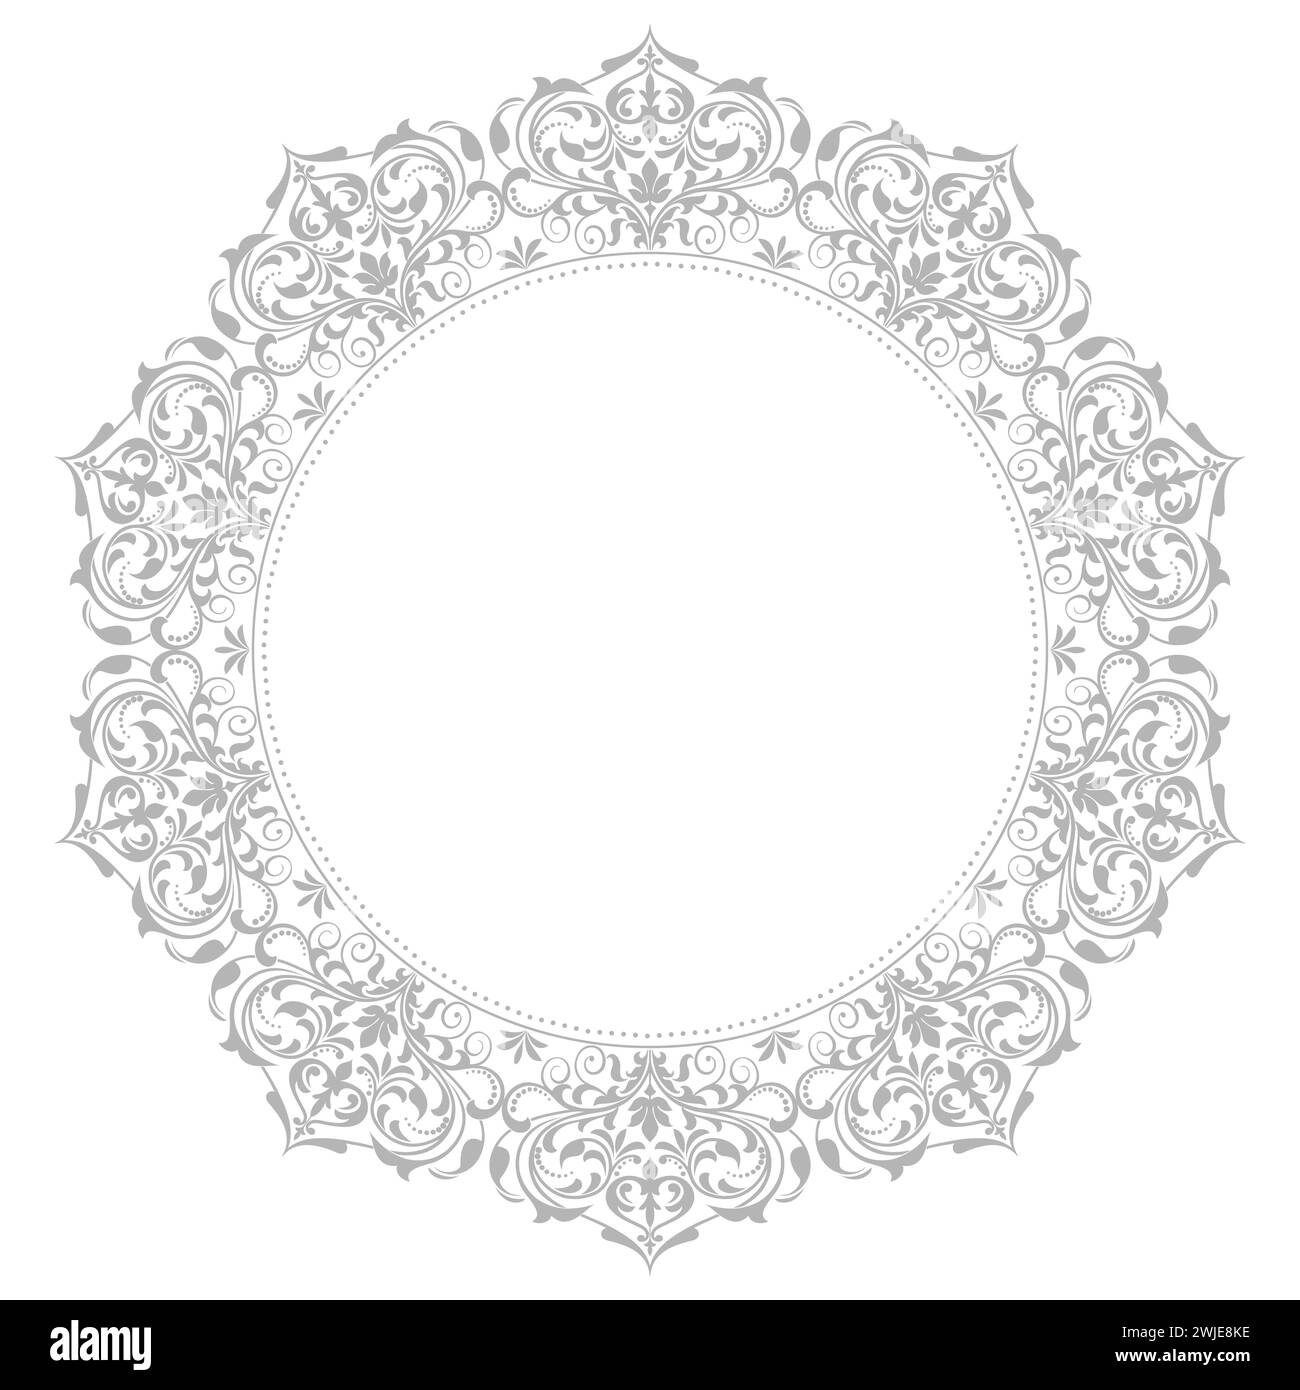 Grey outline floral border. Lace vector illustration for invitations and greeting cards Stock Vector